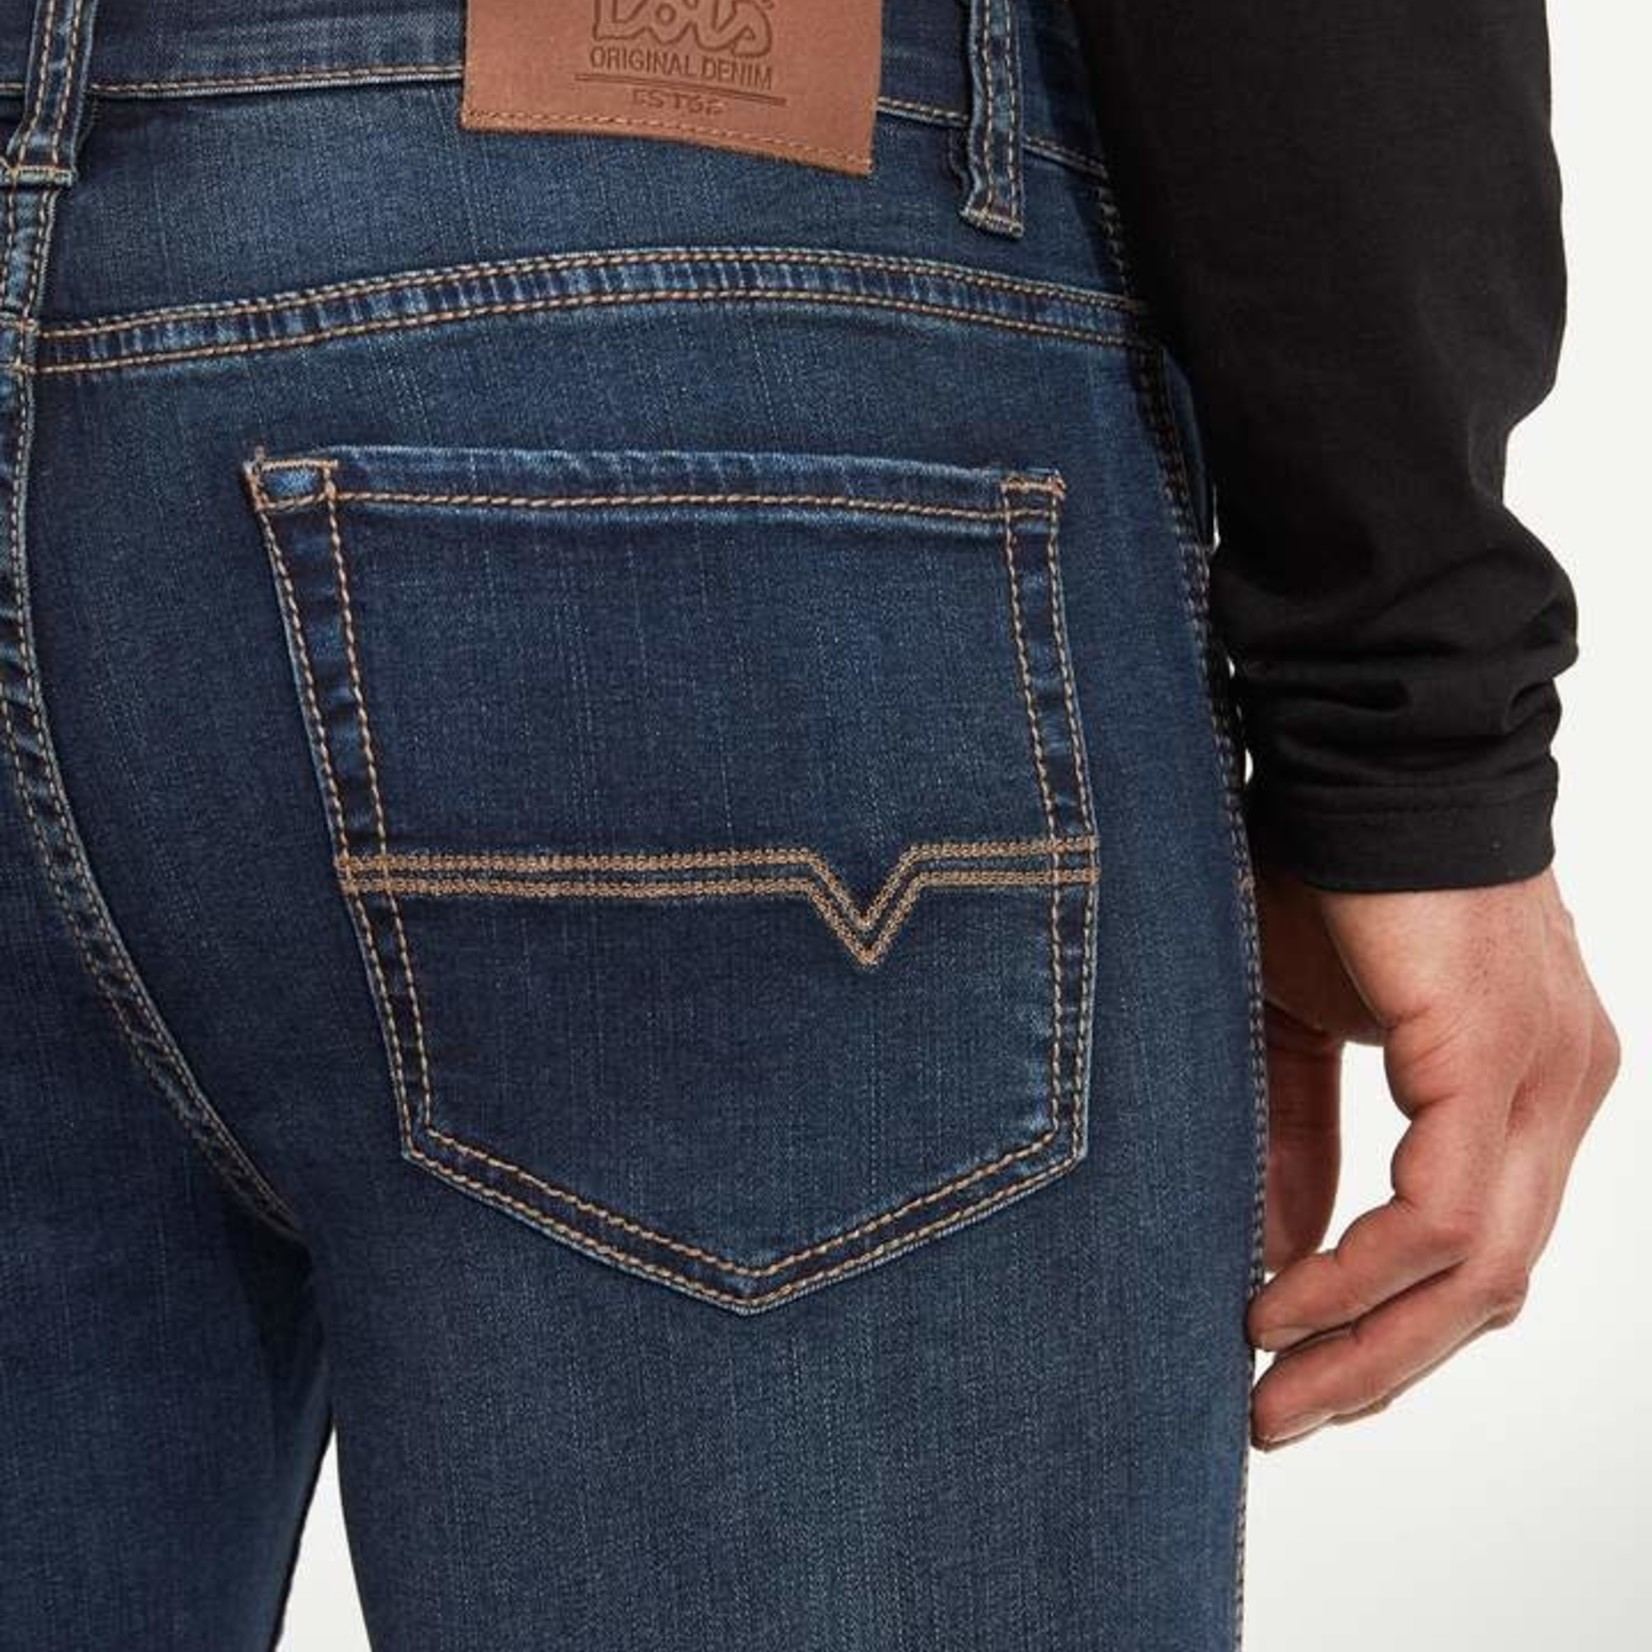 Lois Jeans Canada The "Brad-L" by Lois Jeans